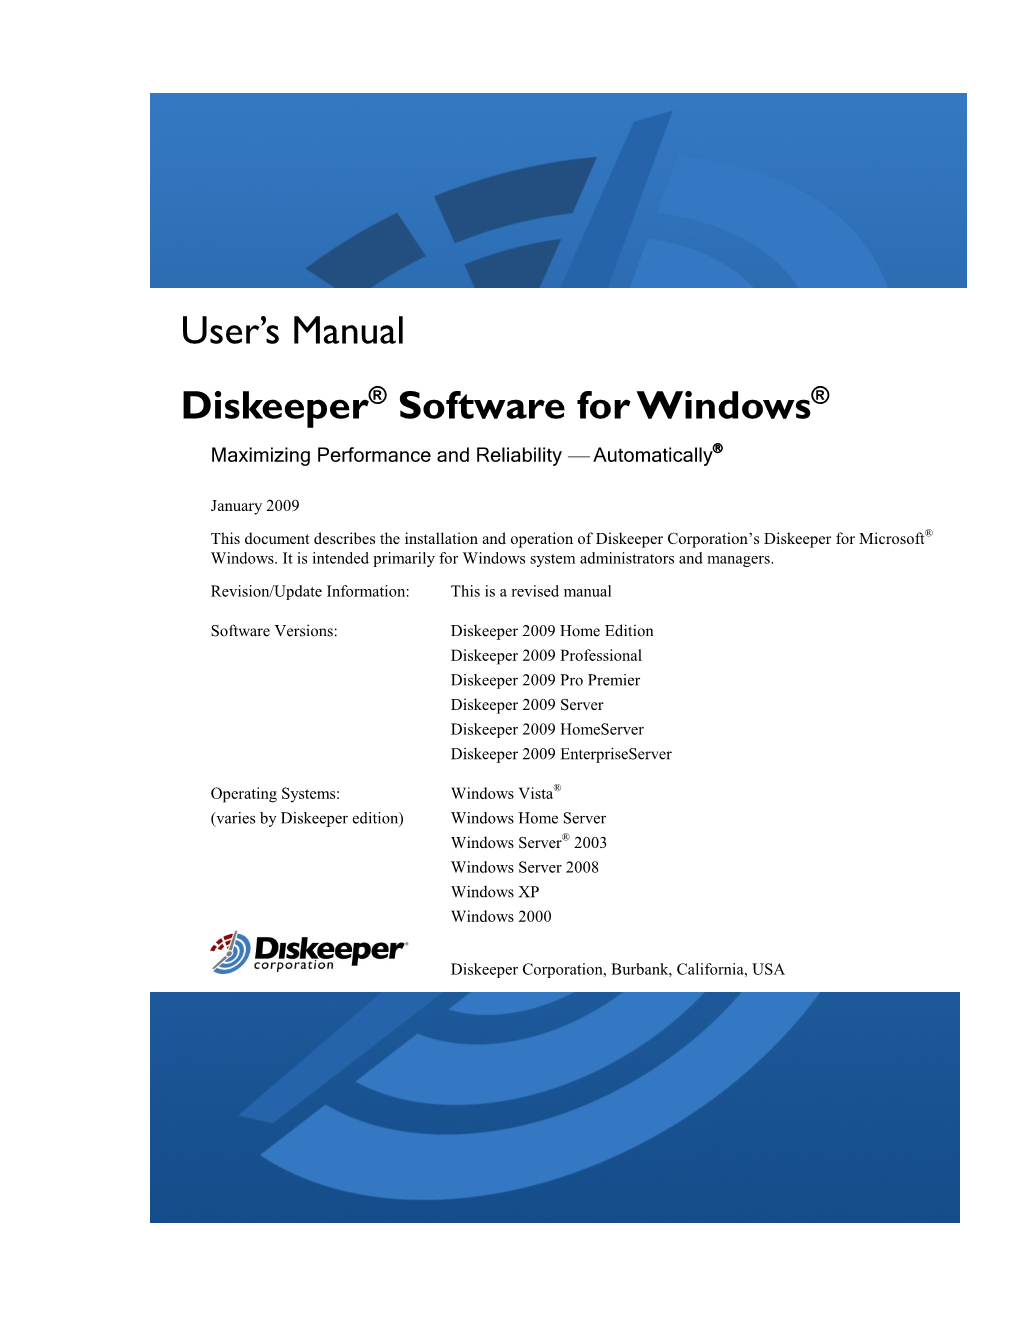 User's Manual Diskeeper® Software for Windows